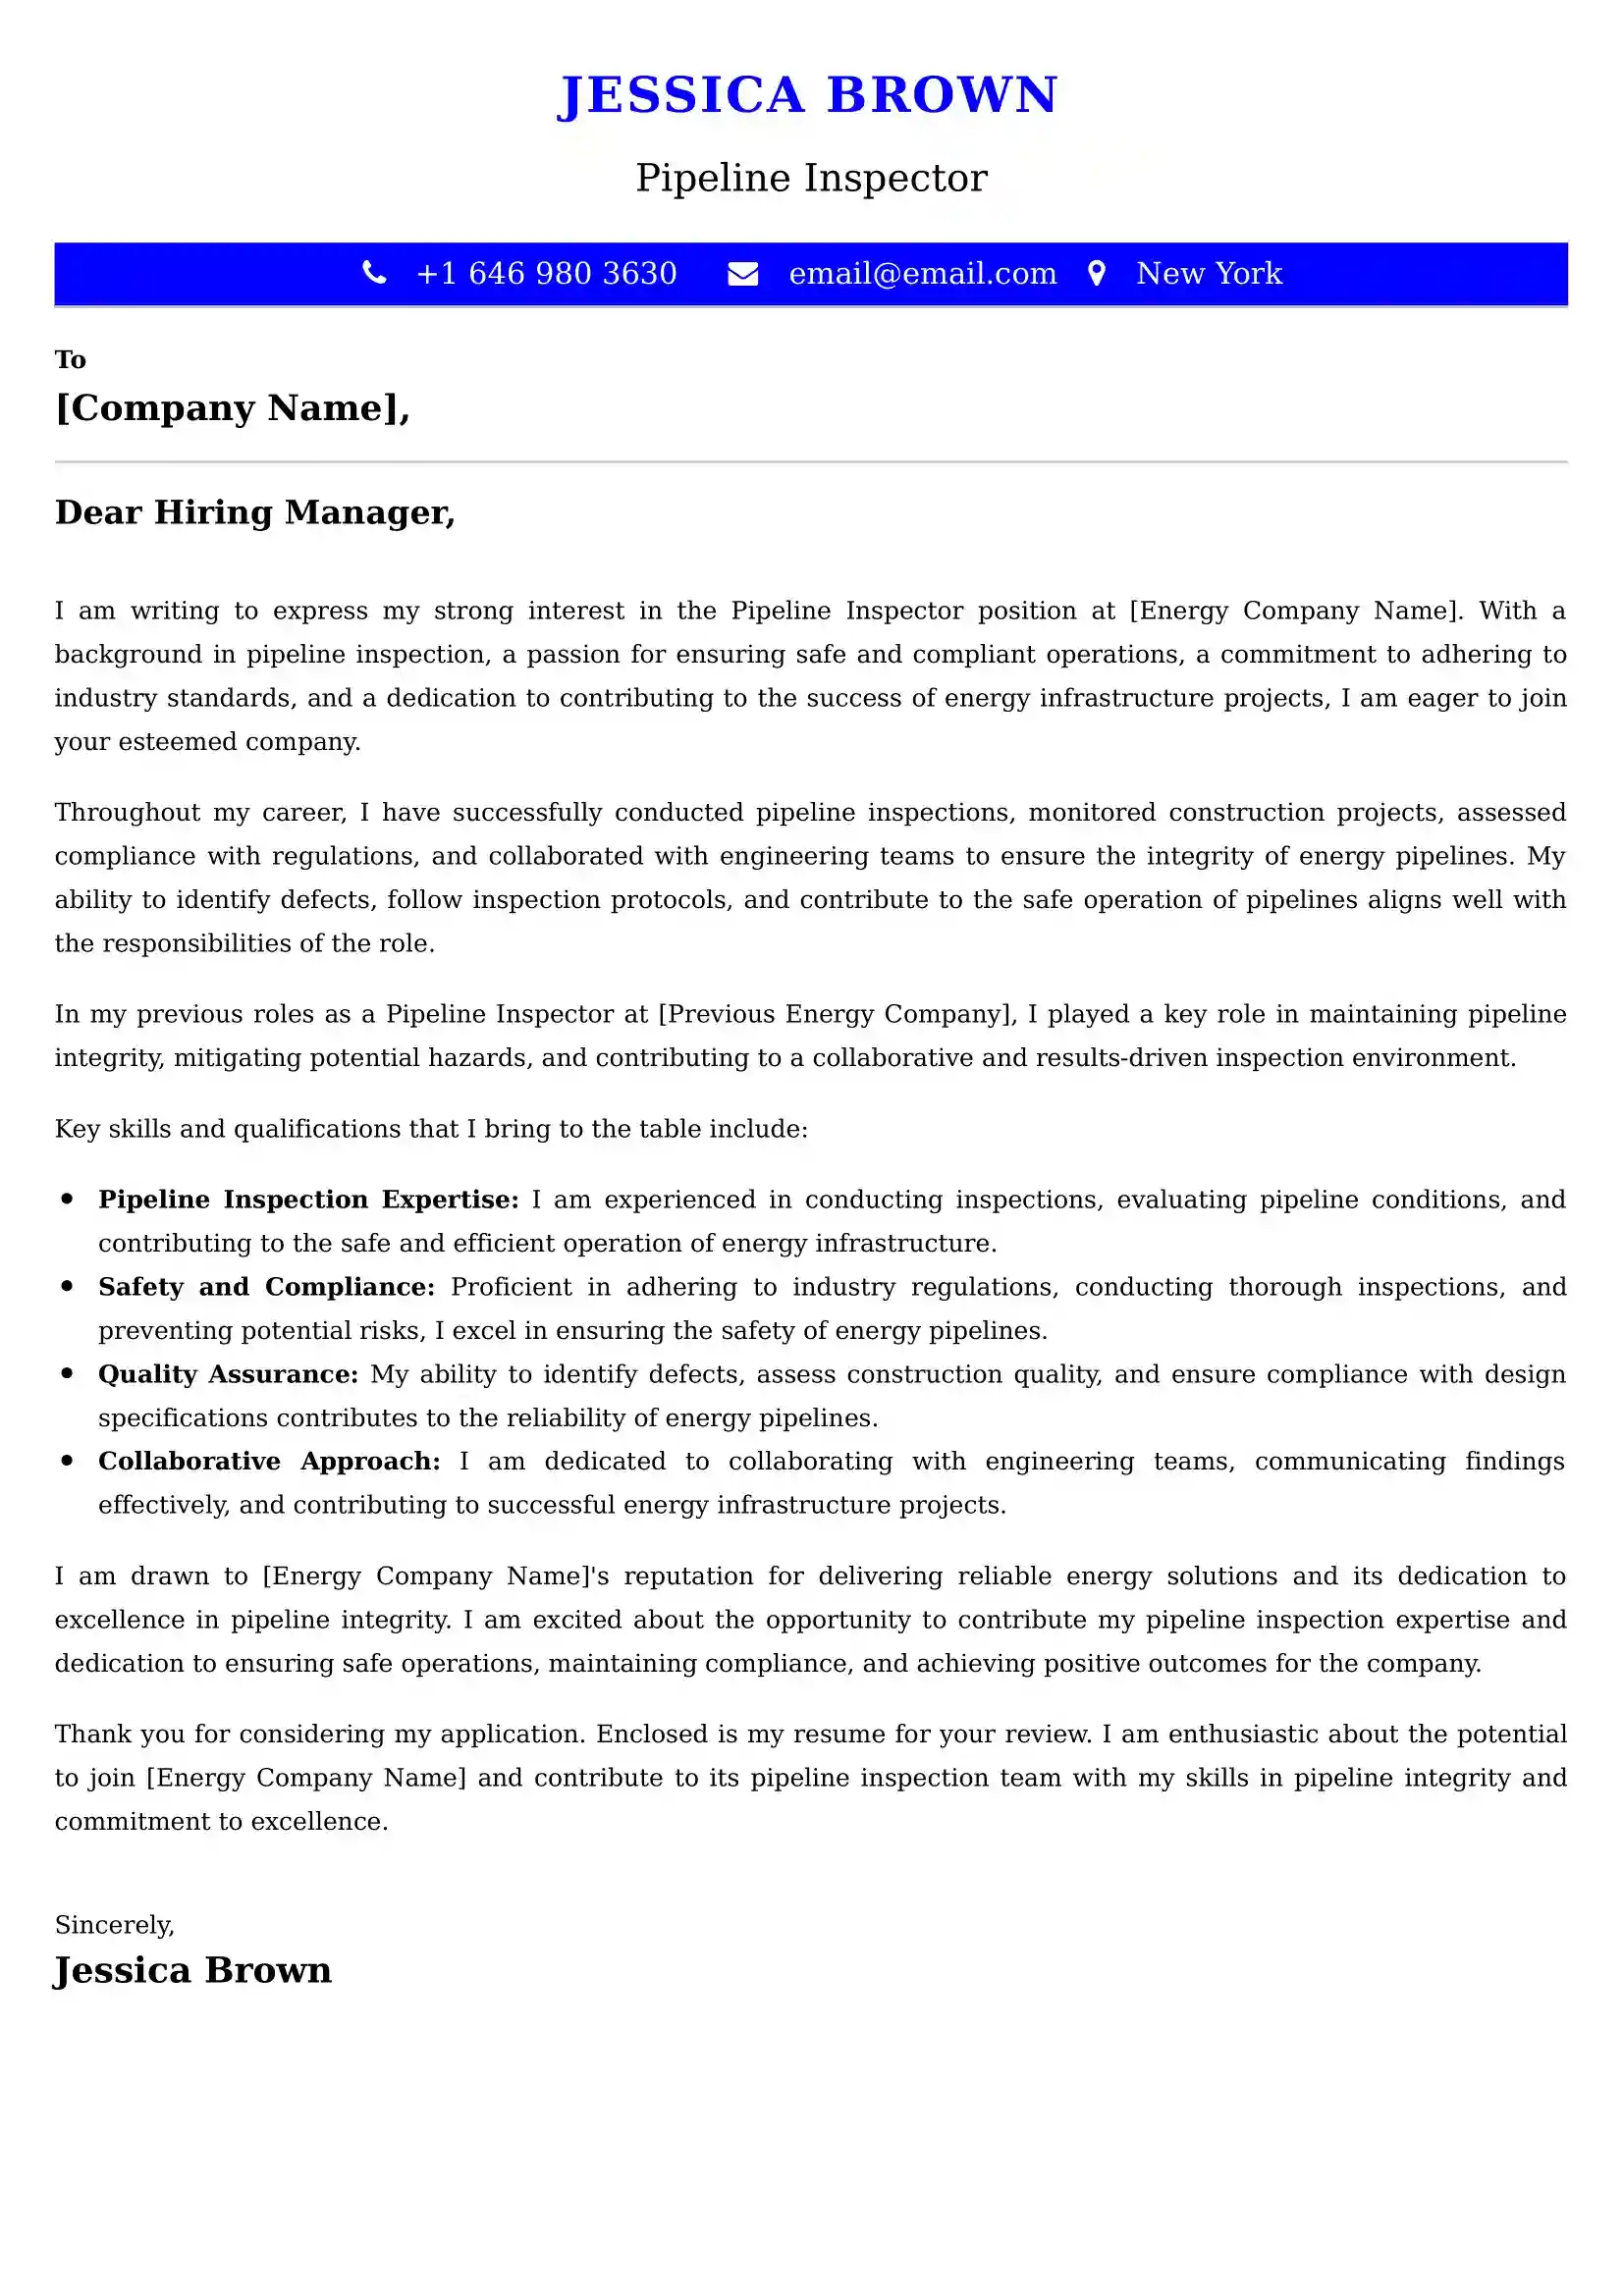 Pipeline Inspector Cover Letter Examples -Latest Brazilian Templates